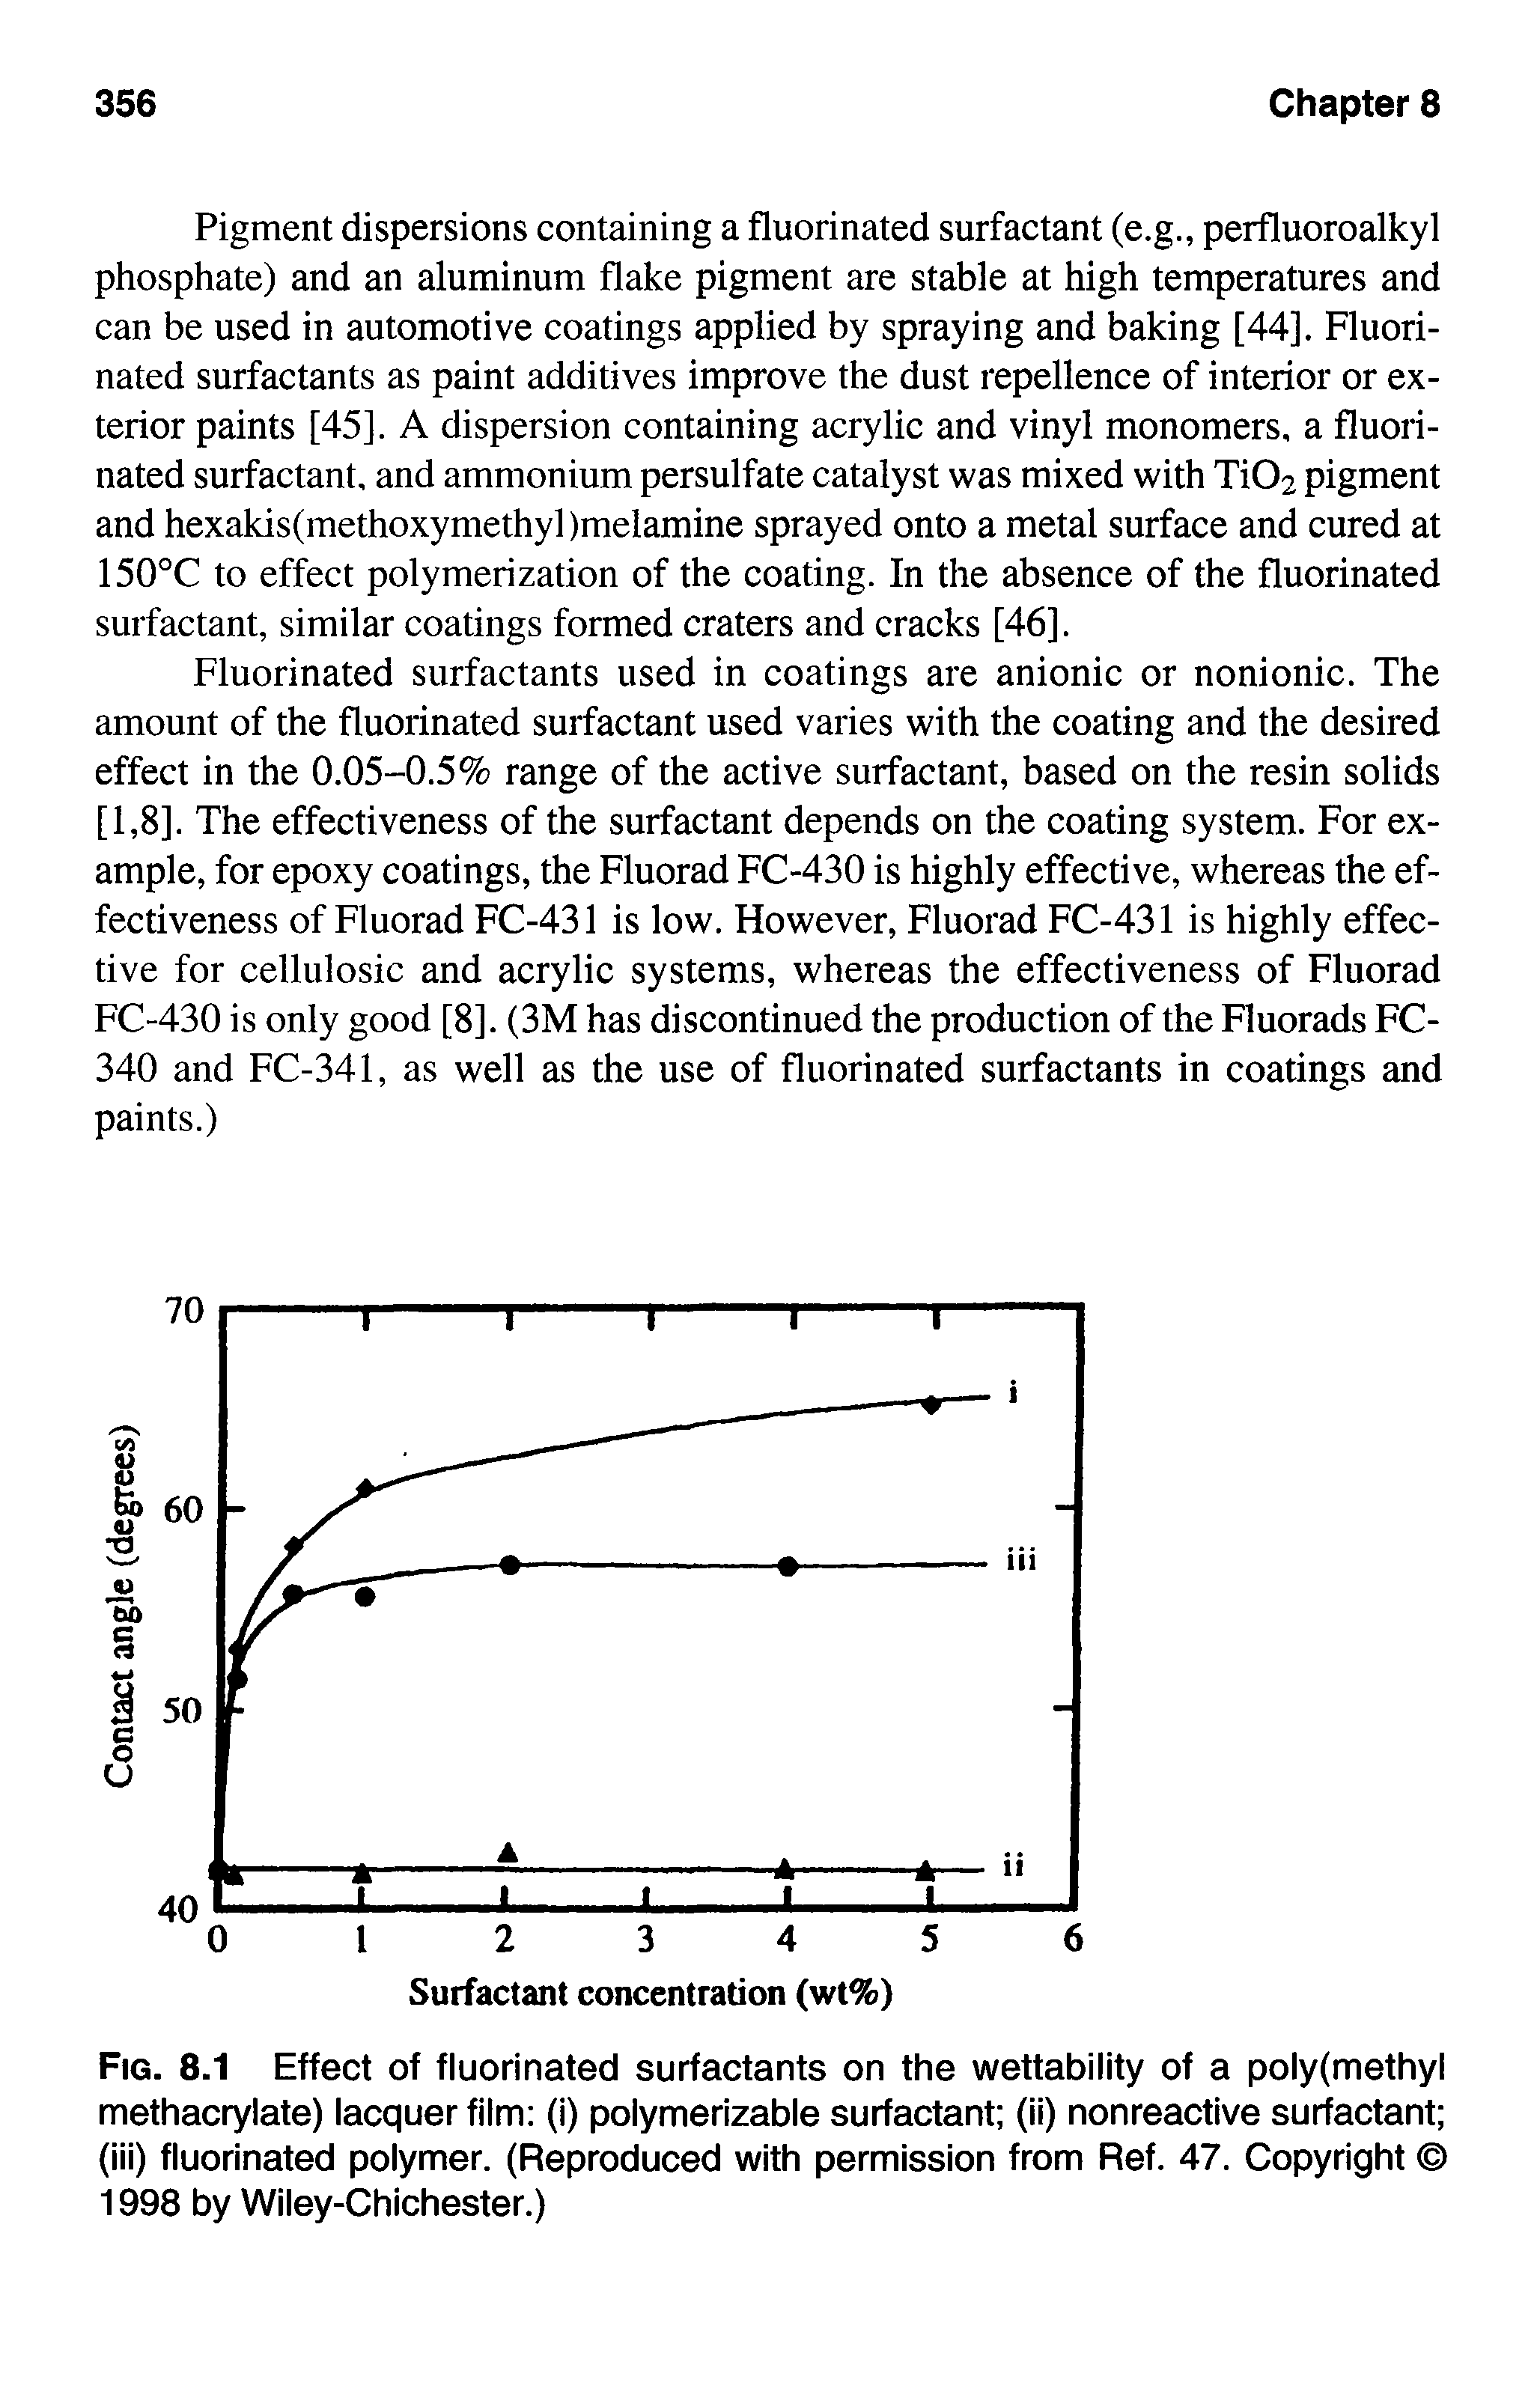 Fig. 8.1 Effect of fluorinated surfactants on the wettability of a poly(methyl methacrylate) lacquer film (i) polymerizable surfactant (ii) nonreactive surfactant (iii) fluorinated polymer. (Reproduced with permission from Ref. 47. Copyright 1998 by Wiley-Chichester.)...